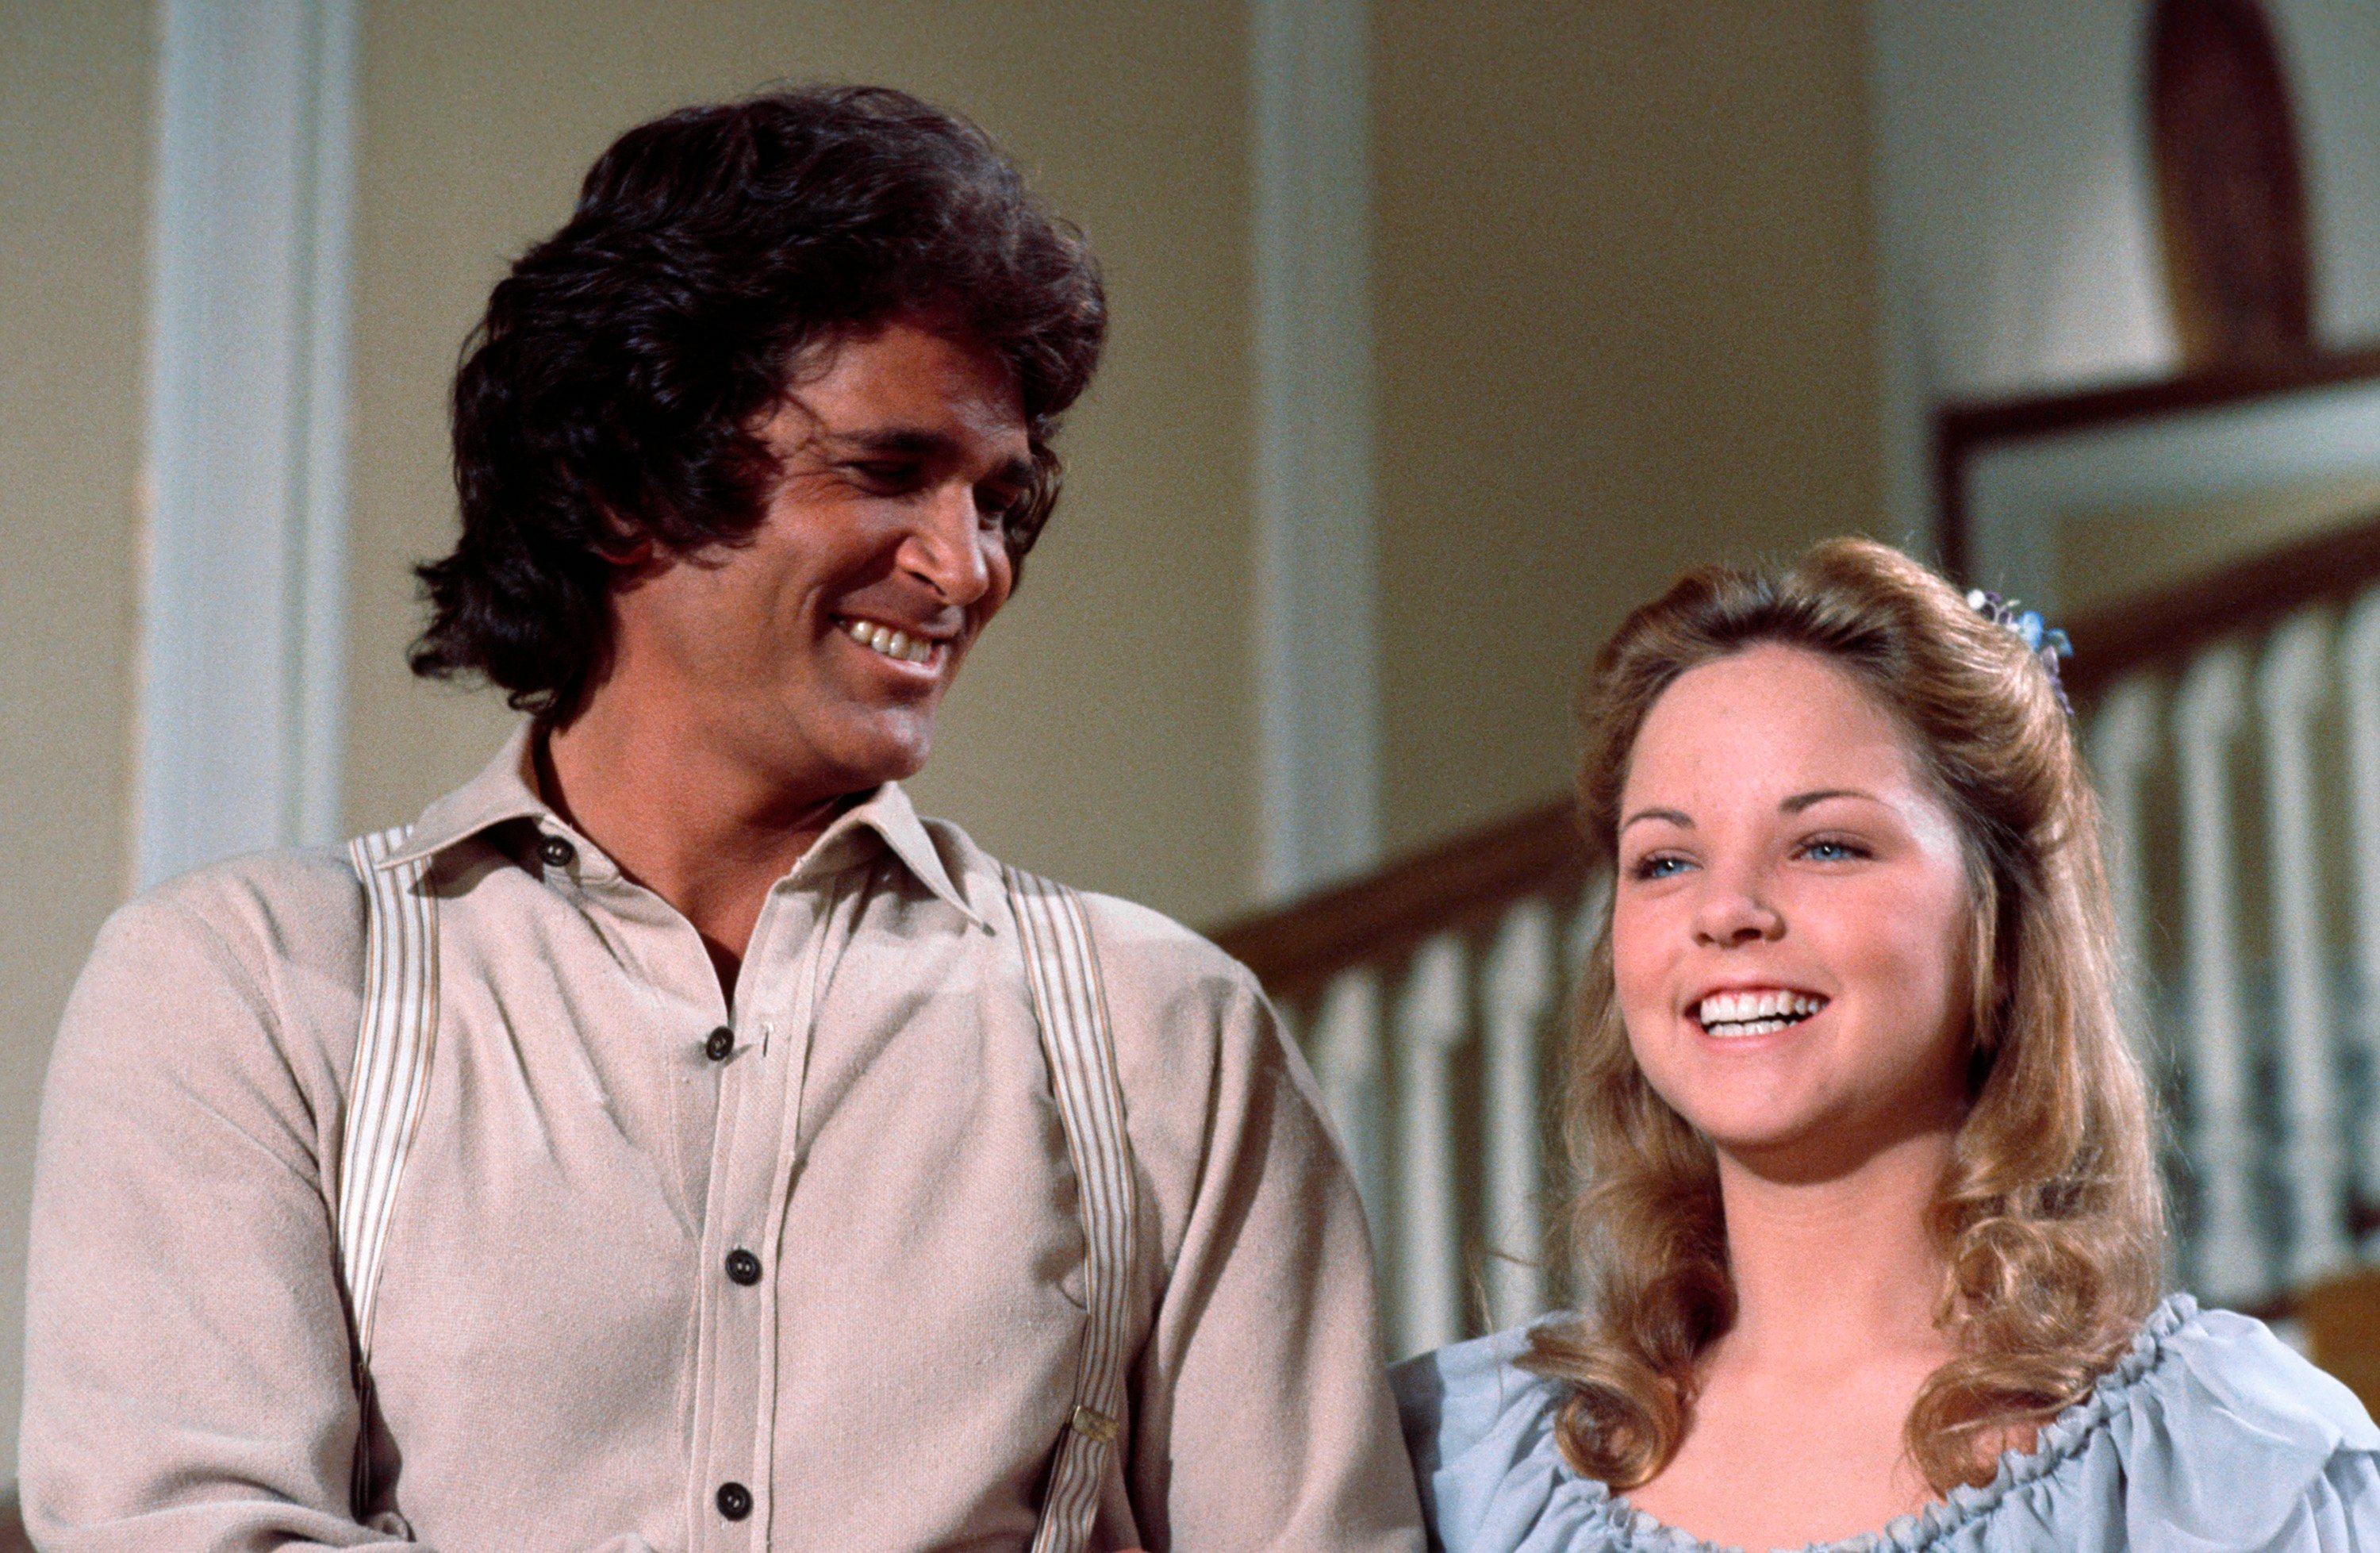 Michael Landon and Melissa Sue Anderson on 'Little House on the Prairie,' 1977